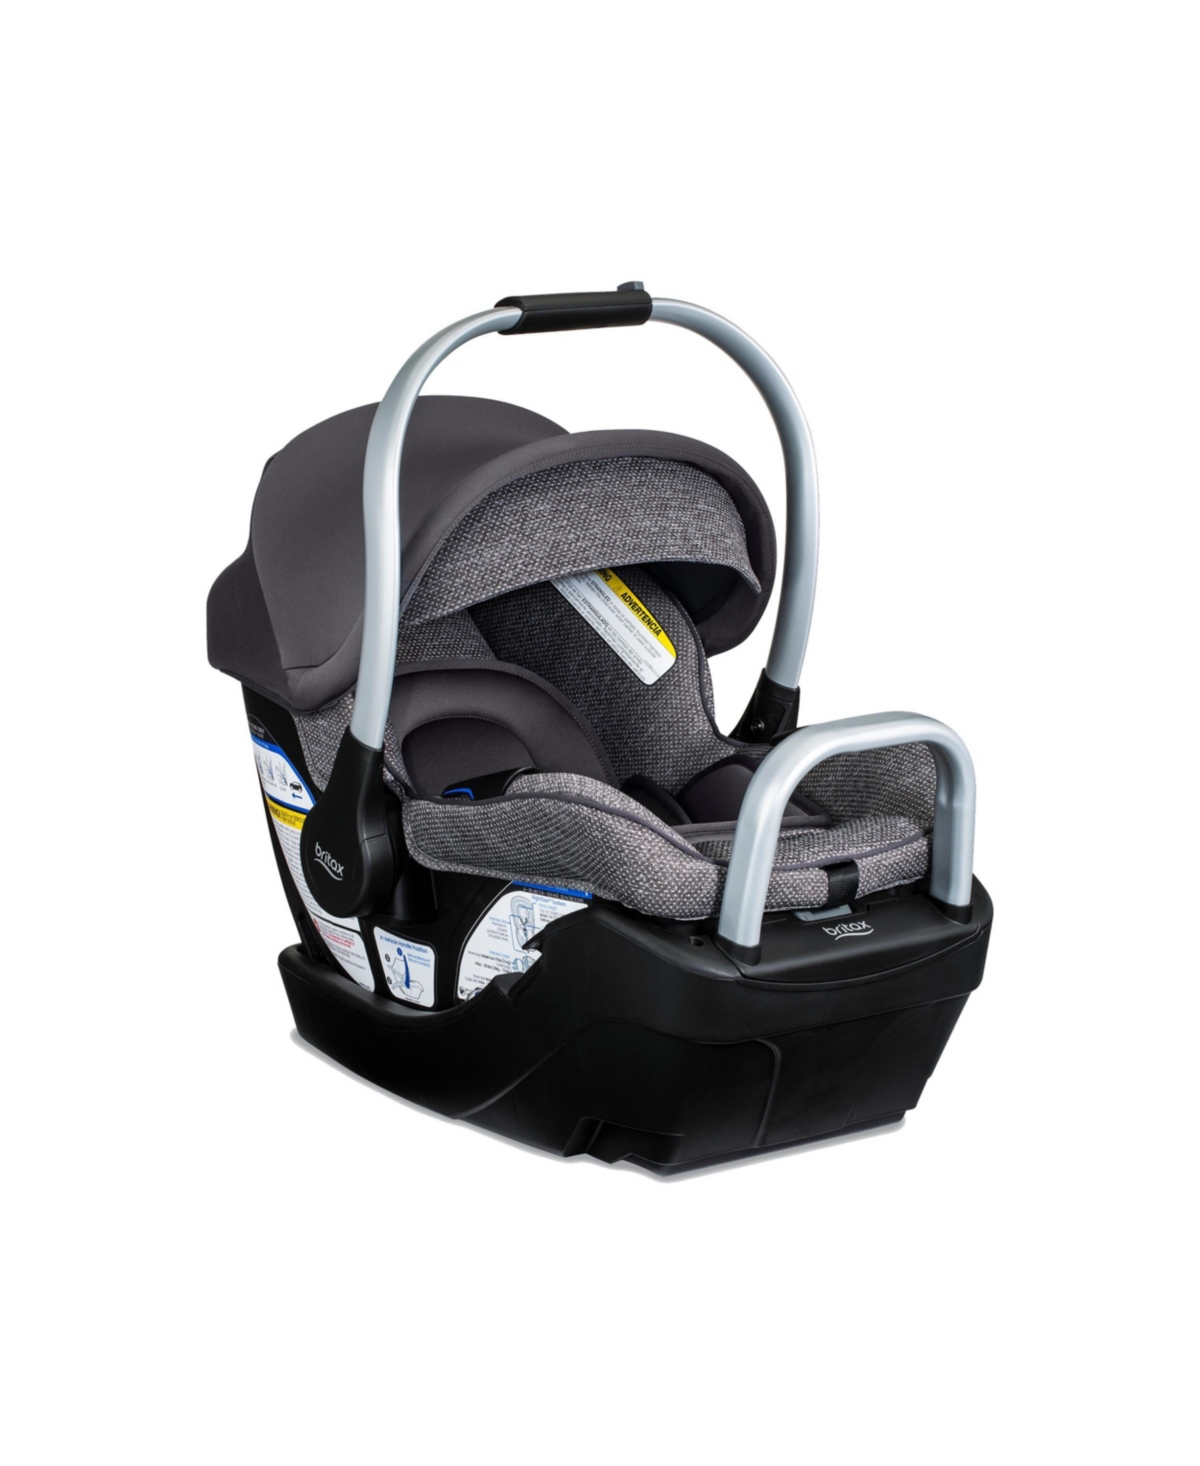 Britax Babies' Willow Sc Infant Car Seat With Alpine Base In Grey